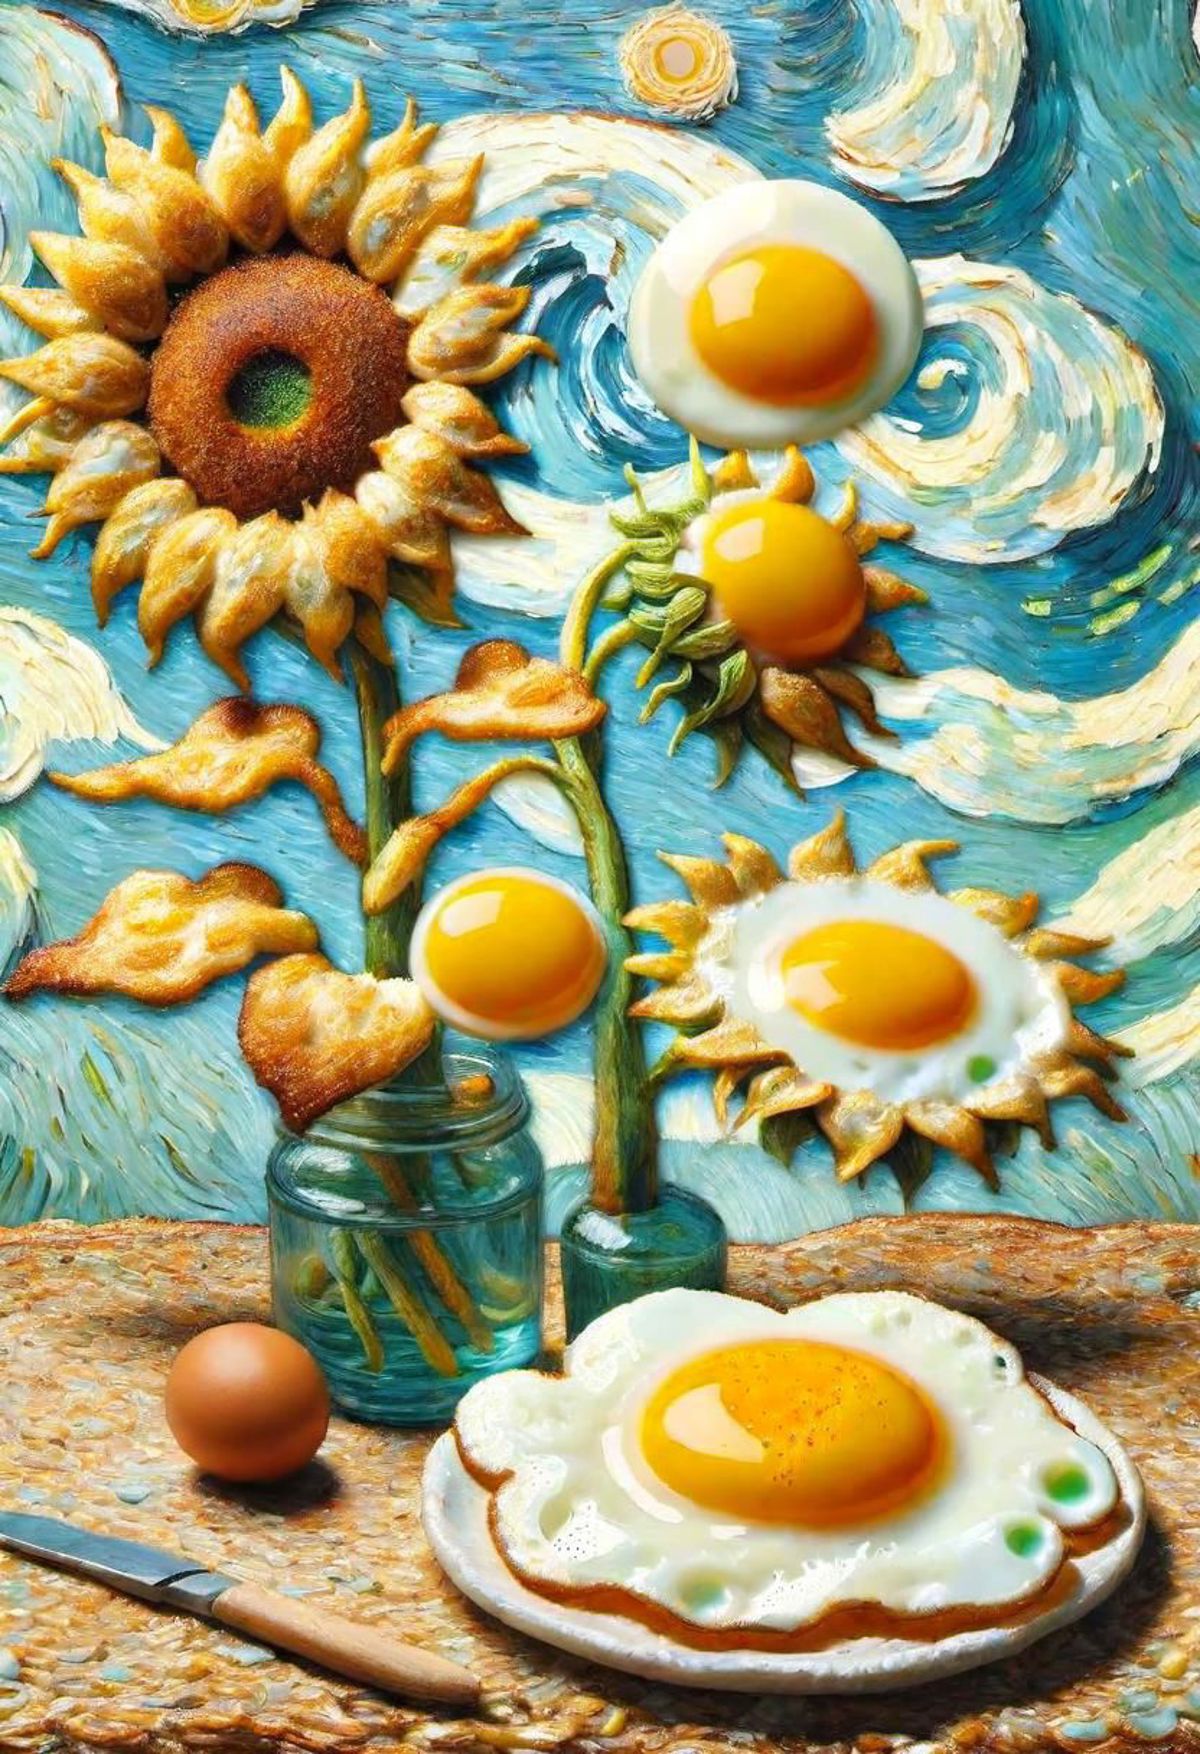 A Fanciful Artistic Still Life with Eggs, Sunflowers, and Food Art.